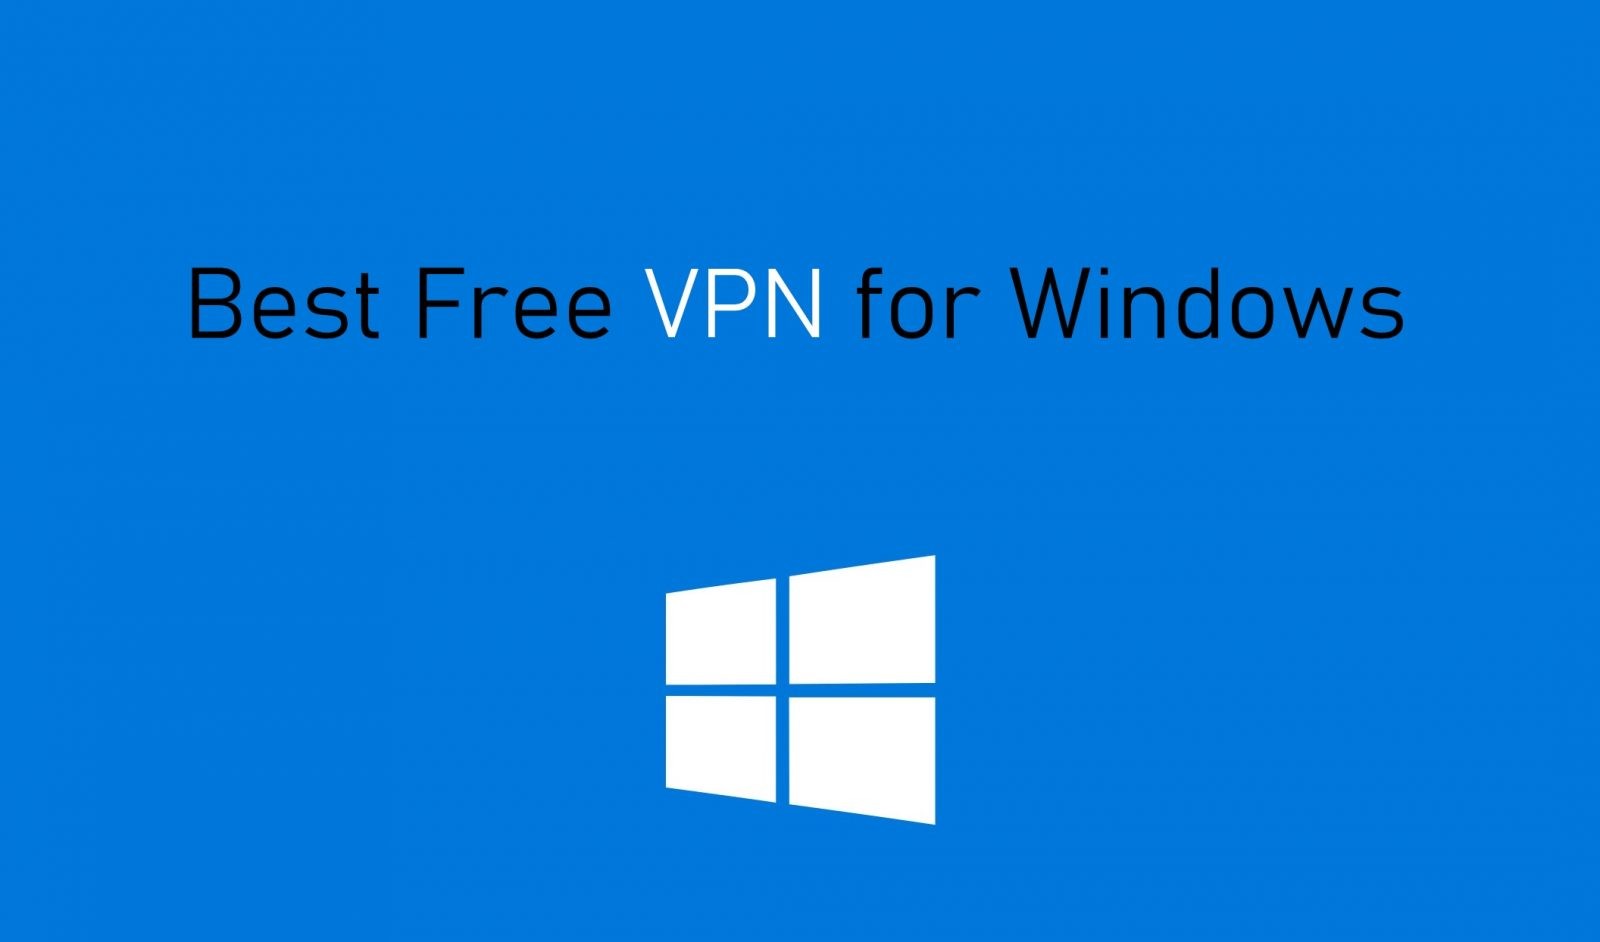 The best free VPN for Windows - 2023 edition